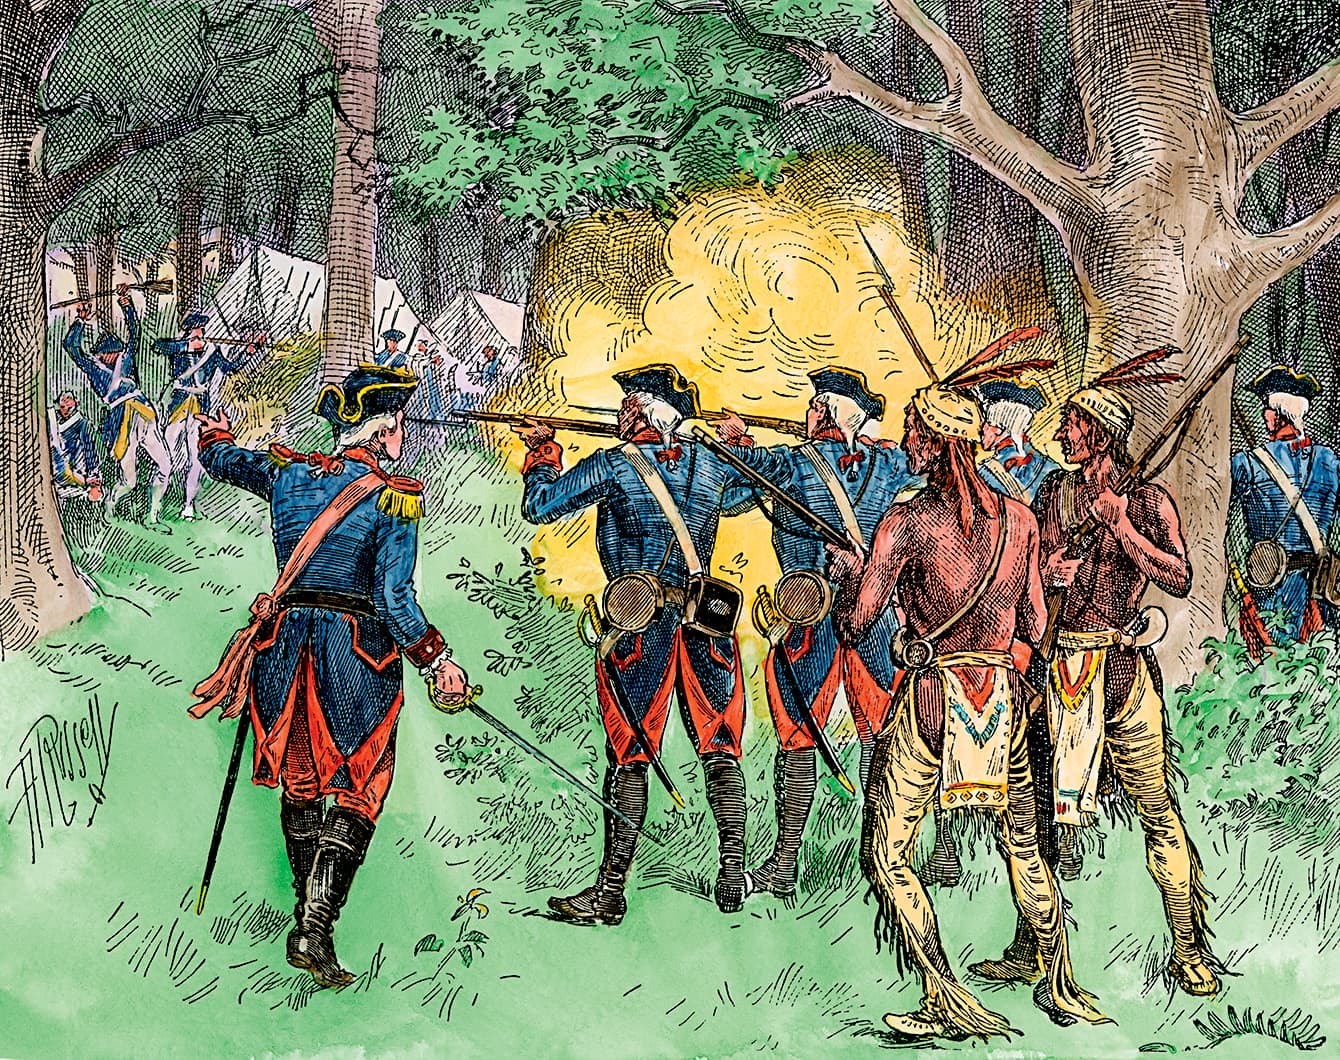 A hand-colored woodcut depicting George Washington’s 1754 attack on a French  encampment near Fort Necessity in Pennsylvania.